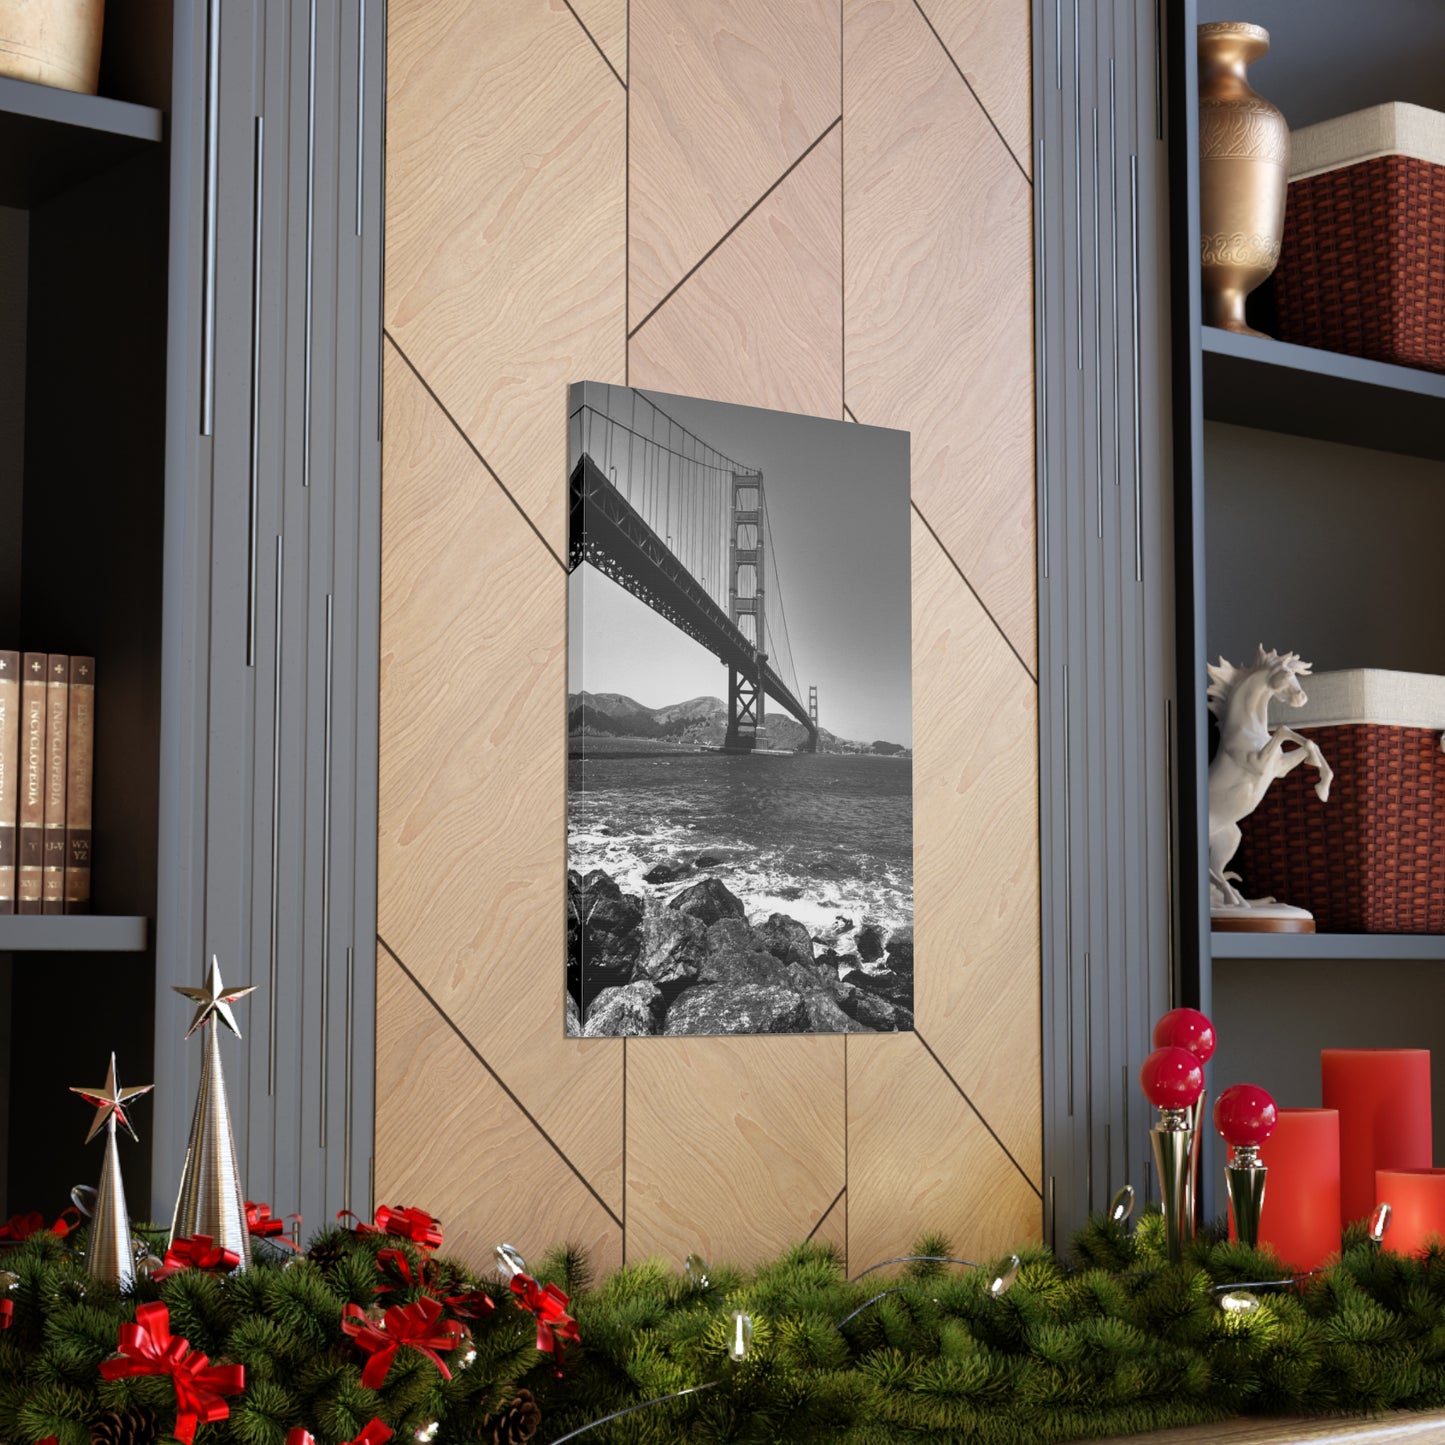 Canvas Print Of The Golden Gate Bridge In San Francisco In  Black & White For Wall Art